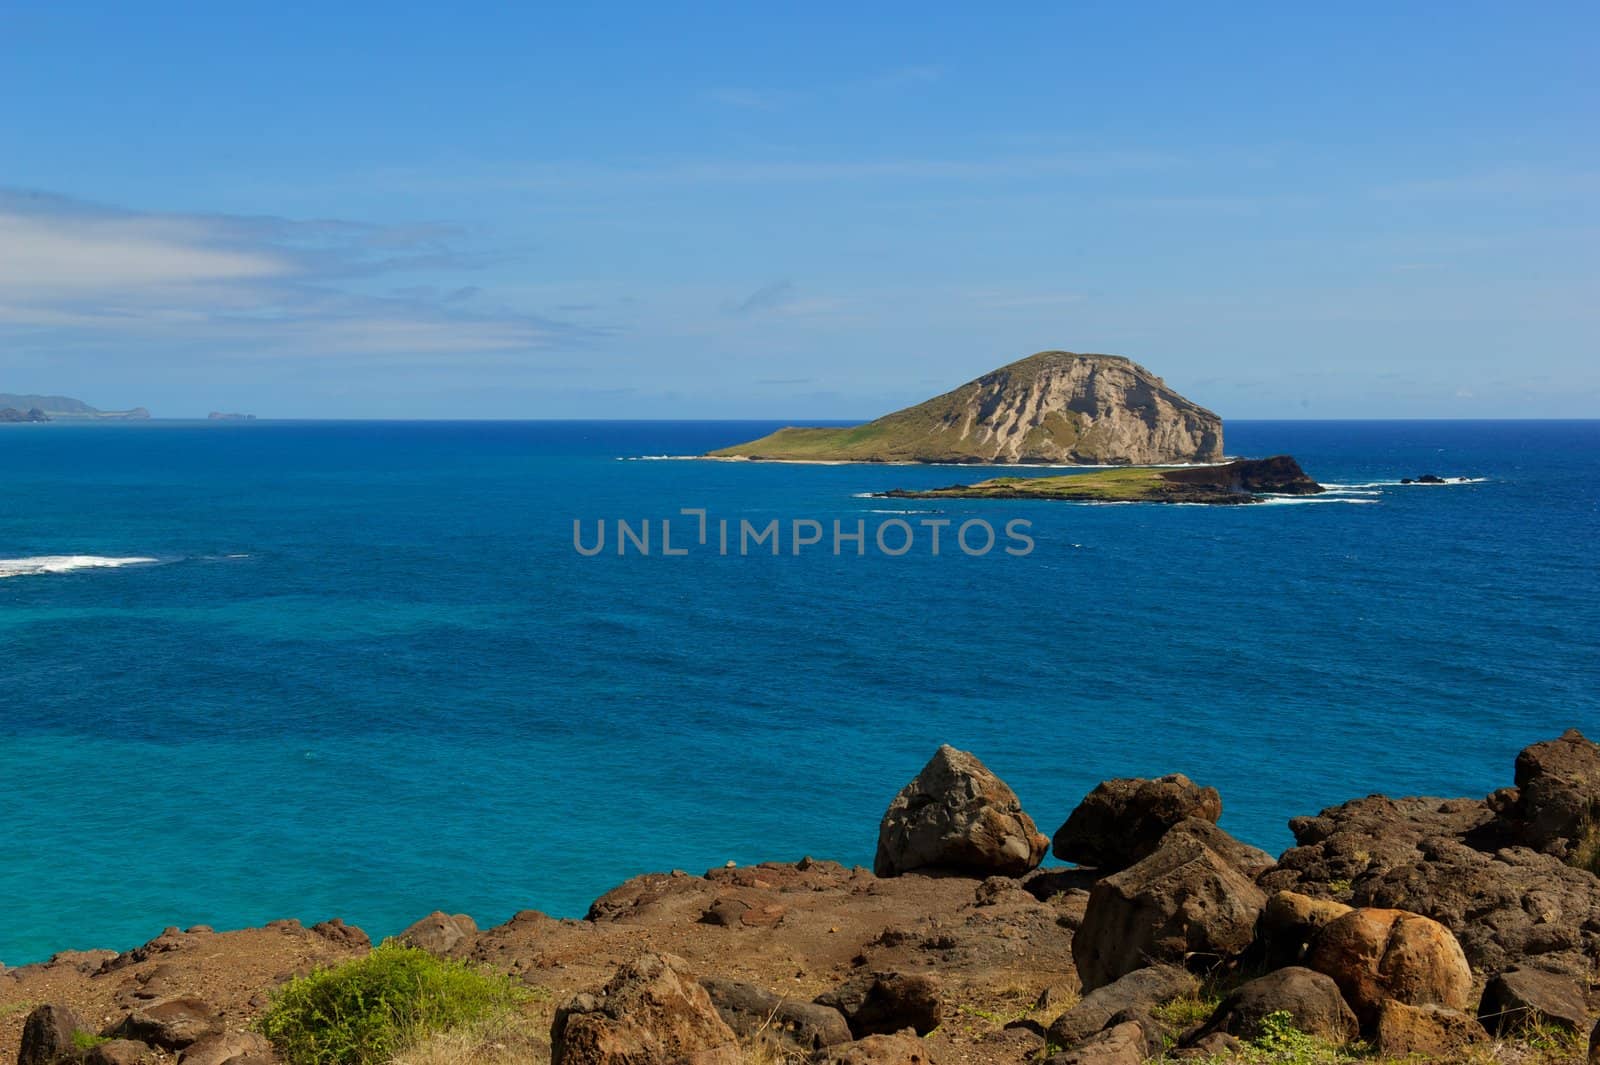 An island view with a beautiful bright, blue ocean, some grass patches, some rocks and sky.